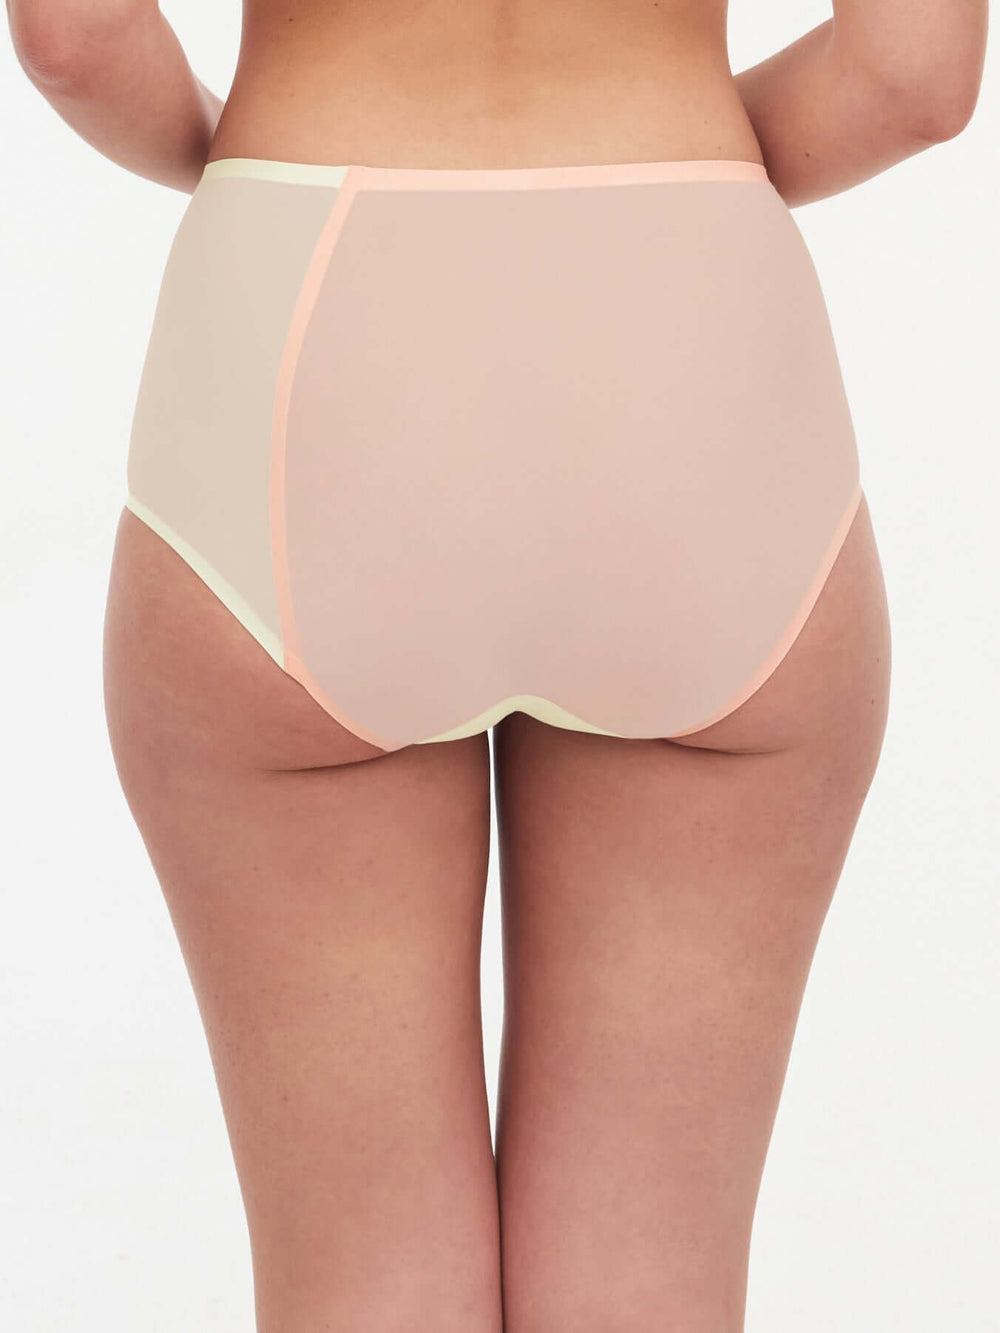 Chantelle Softstretch Calzoncillo completo - Abedul plateado / Melocotón Calzoncillo completo Chantelle